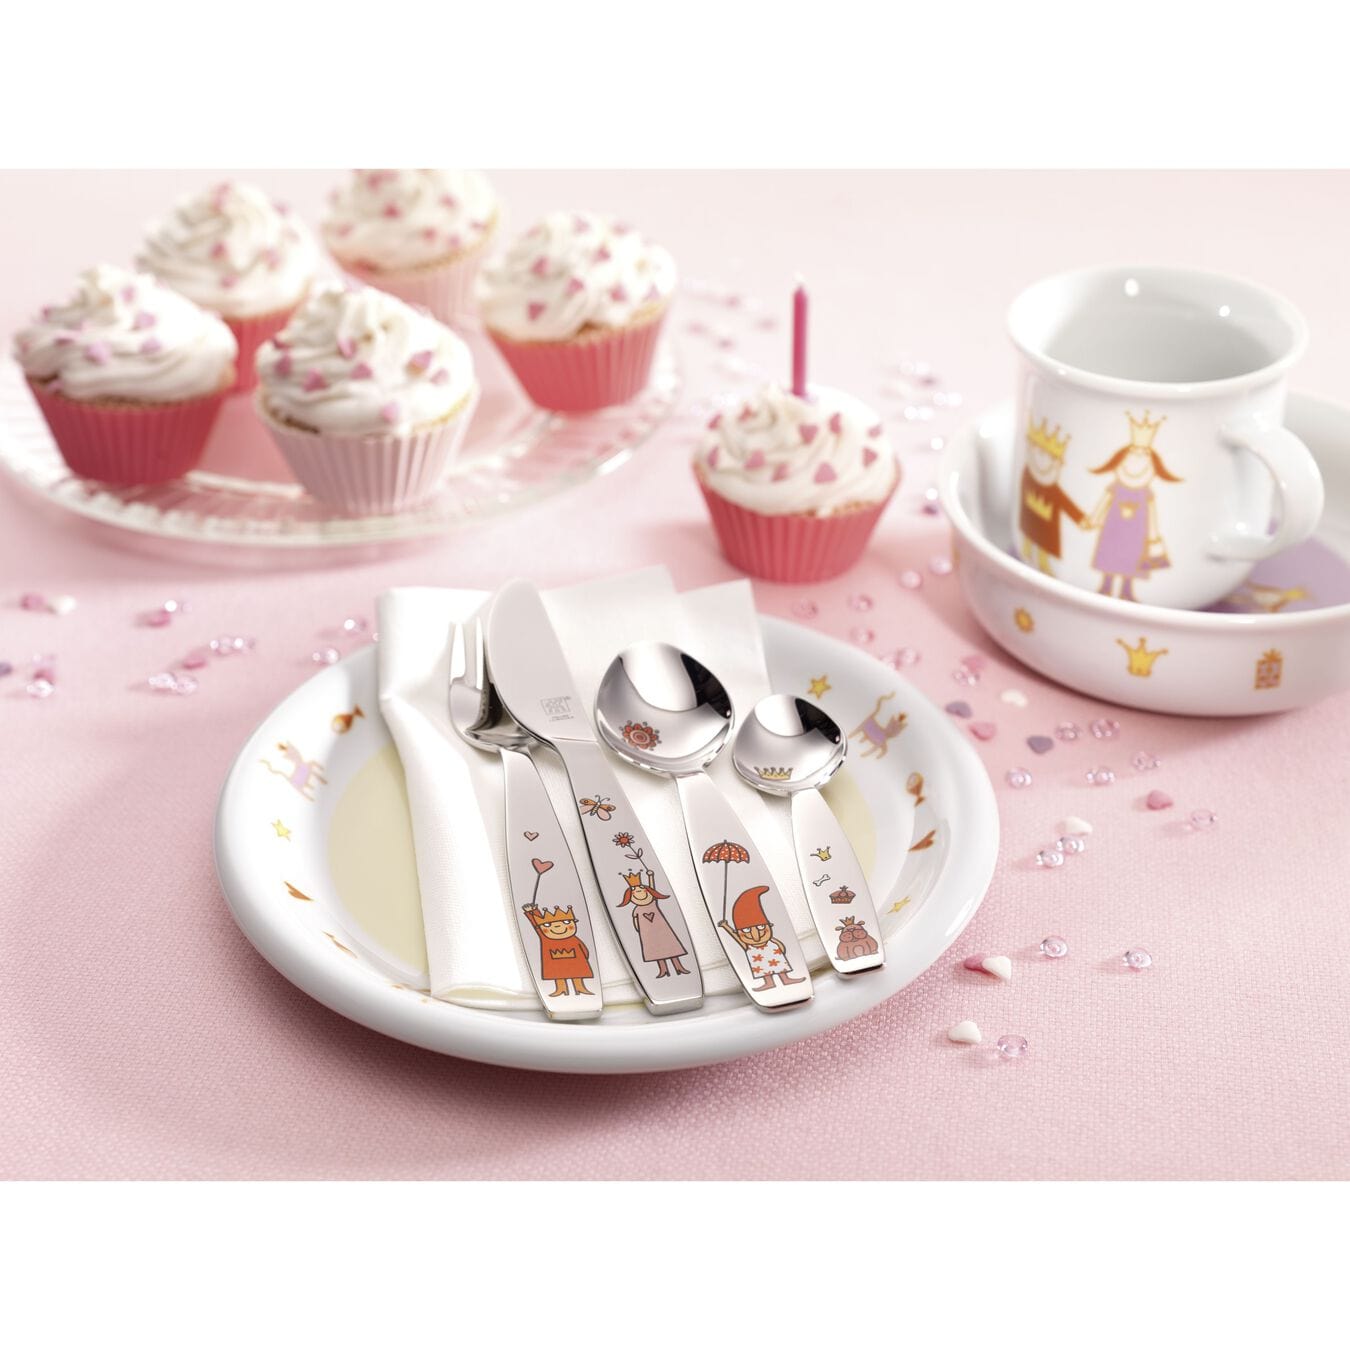 Zwilling Henckle 4 Piece Children's Flatware Set's | 5 themes to choose from